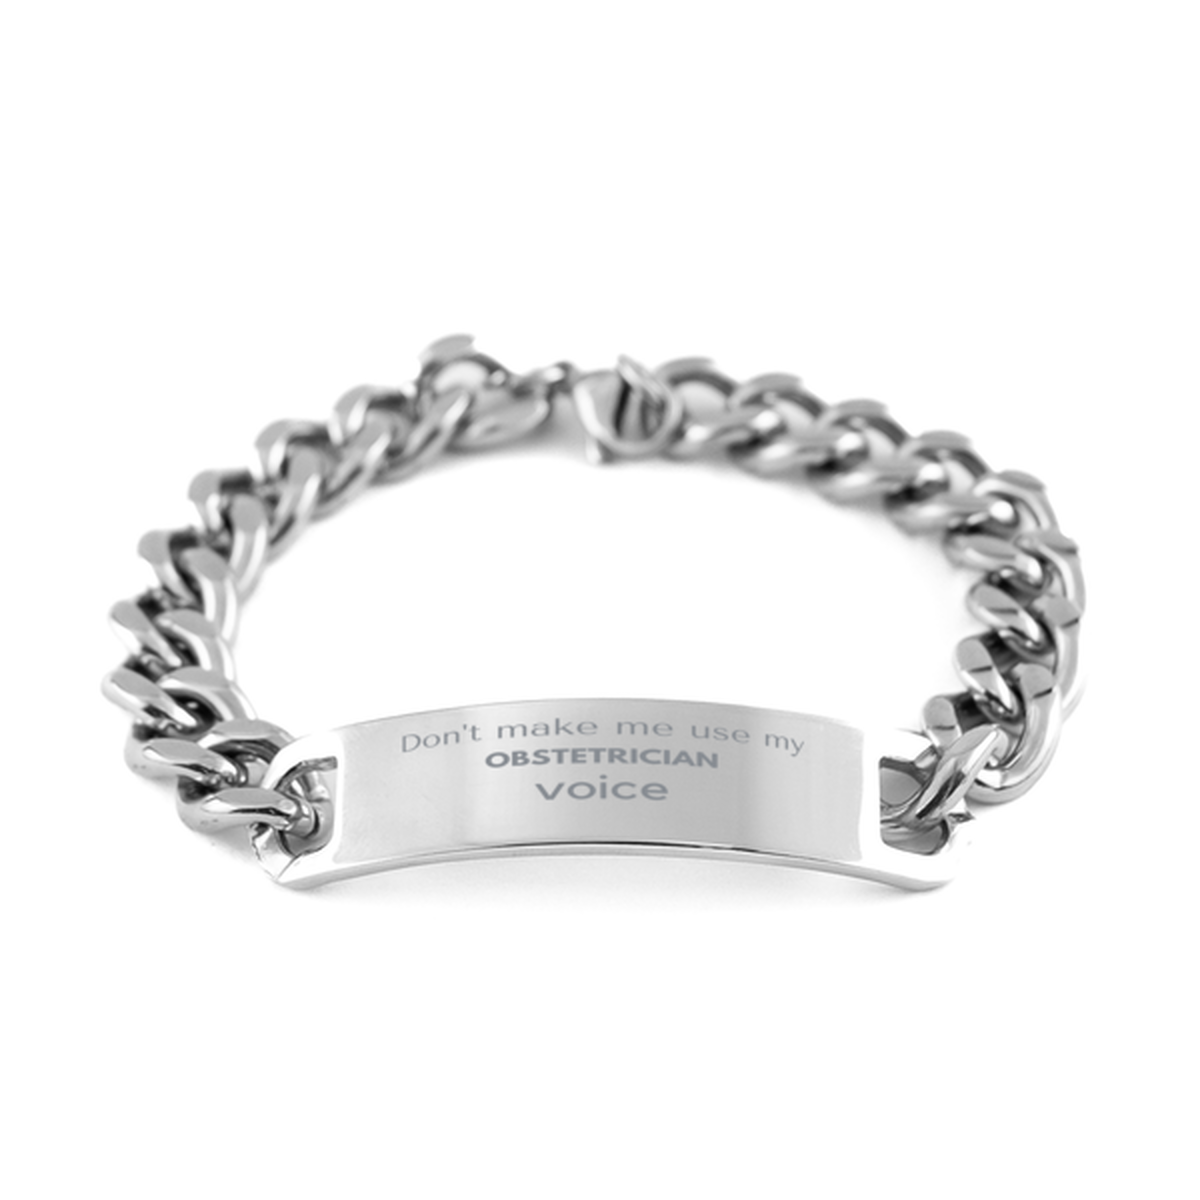 Don't make me use my Obstetrician voice, Sarcasm Obstetrician Gifts, Christmas Obstetrician Cuban Chain Stainless Steel Bracelet Birthday Unique Gifts For Obstetrician Coworkers, Men, Women, Colleague, Friends